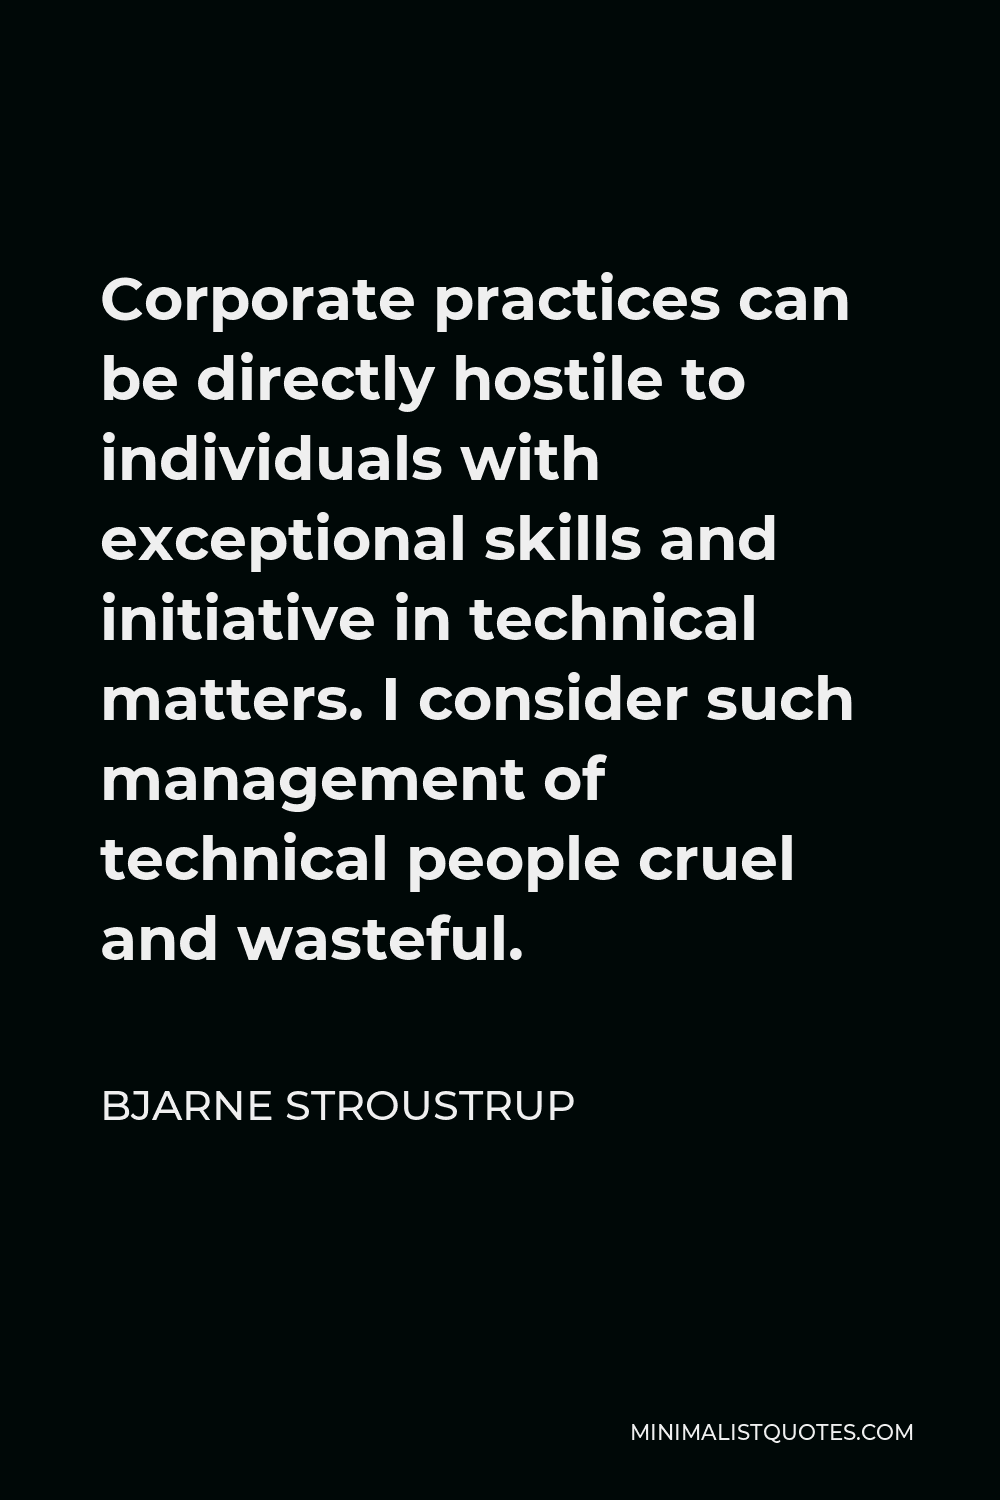 Bjarne Stroustrup Quote - Corporate practices can be directly hostile to individuals with exceptional skills and initiative in technical matters. I consider such management of technical people cruel and wasteful.